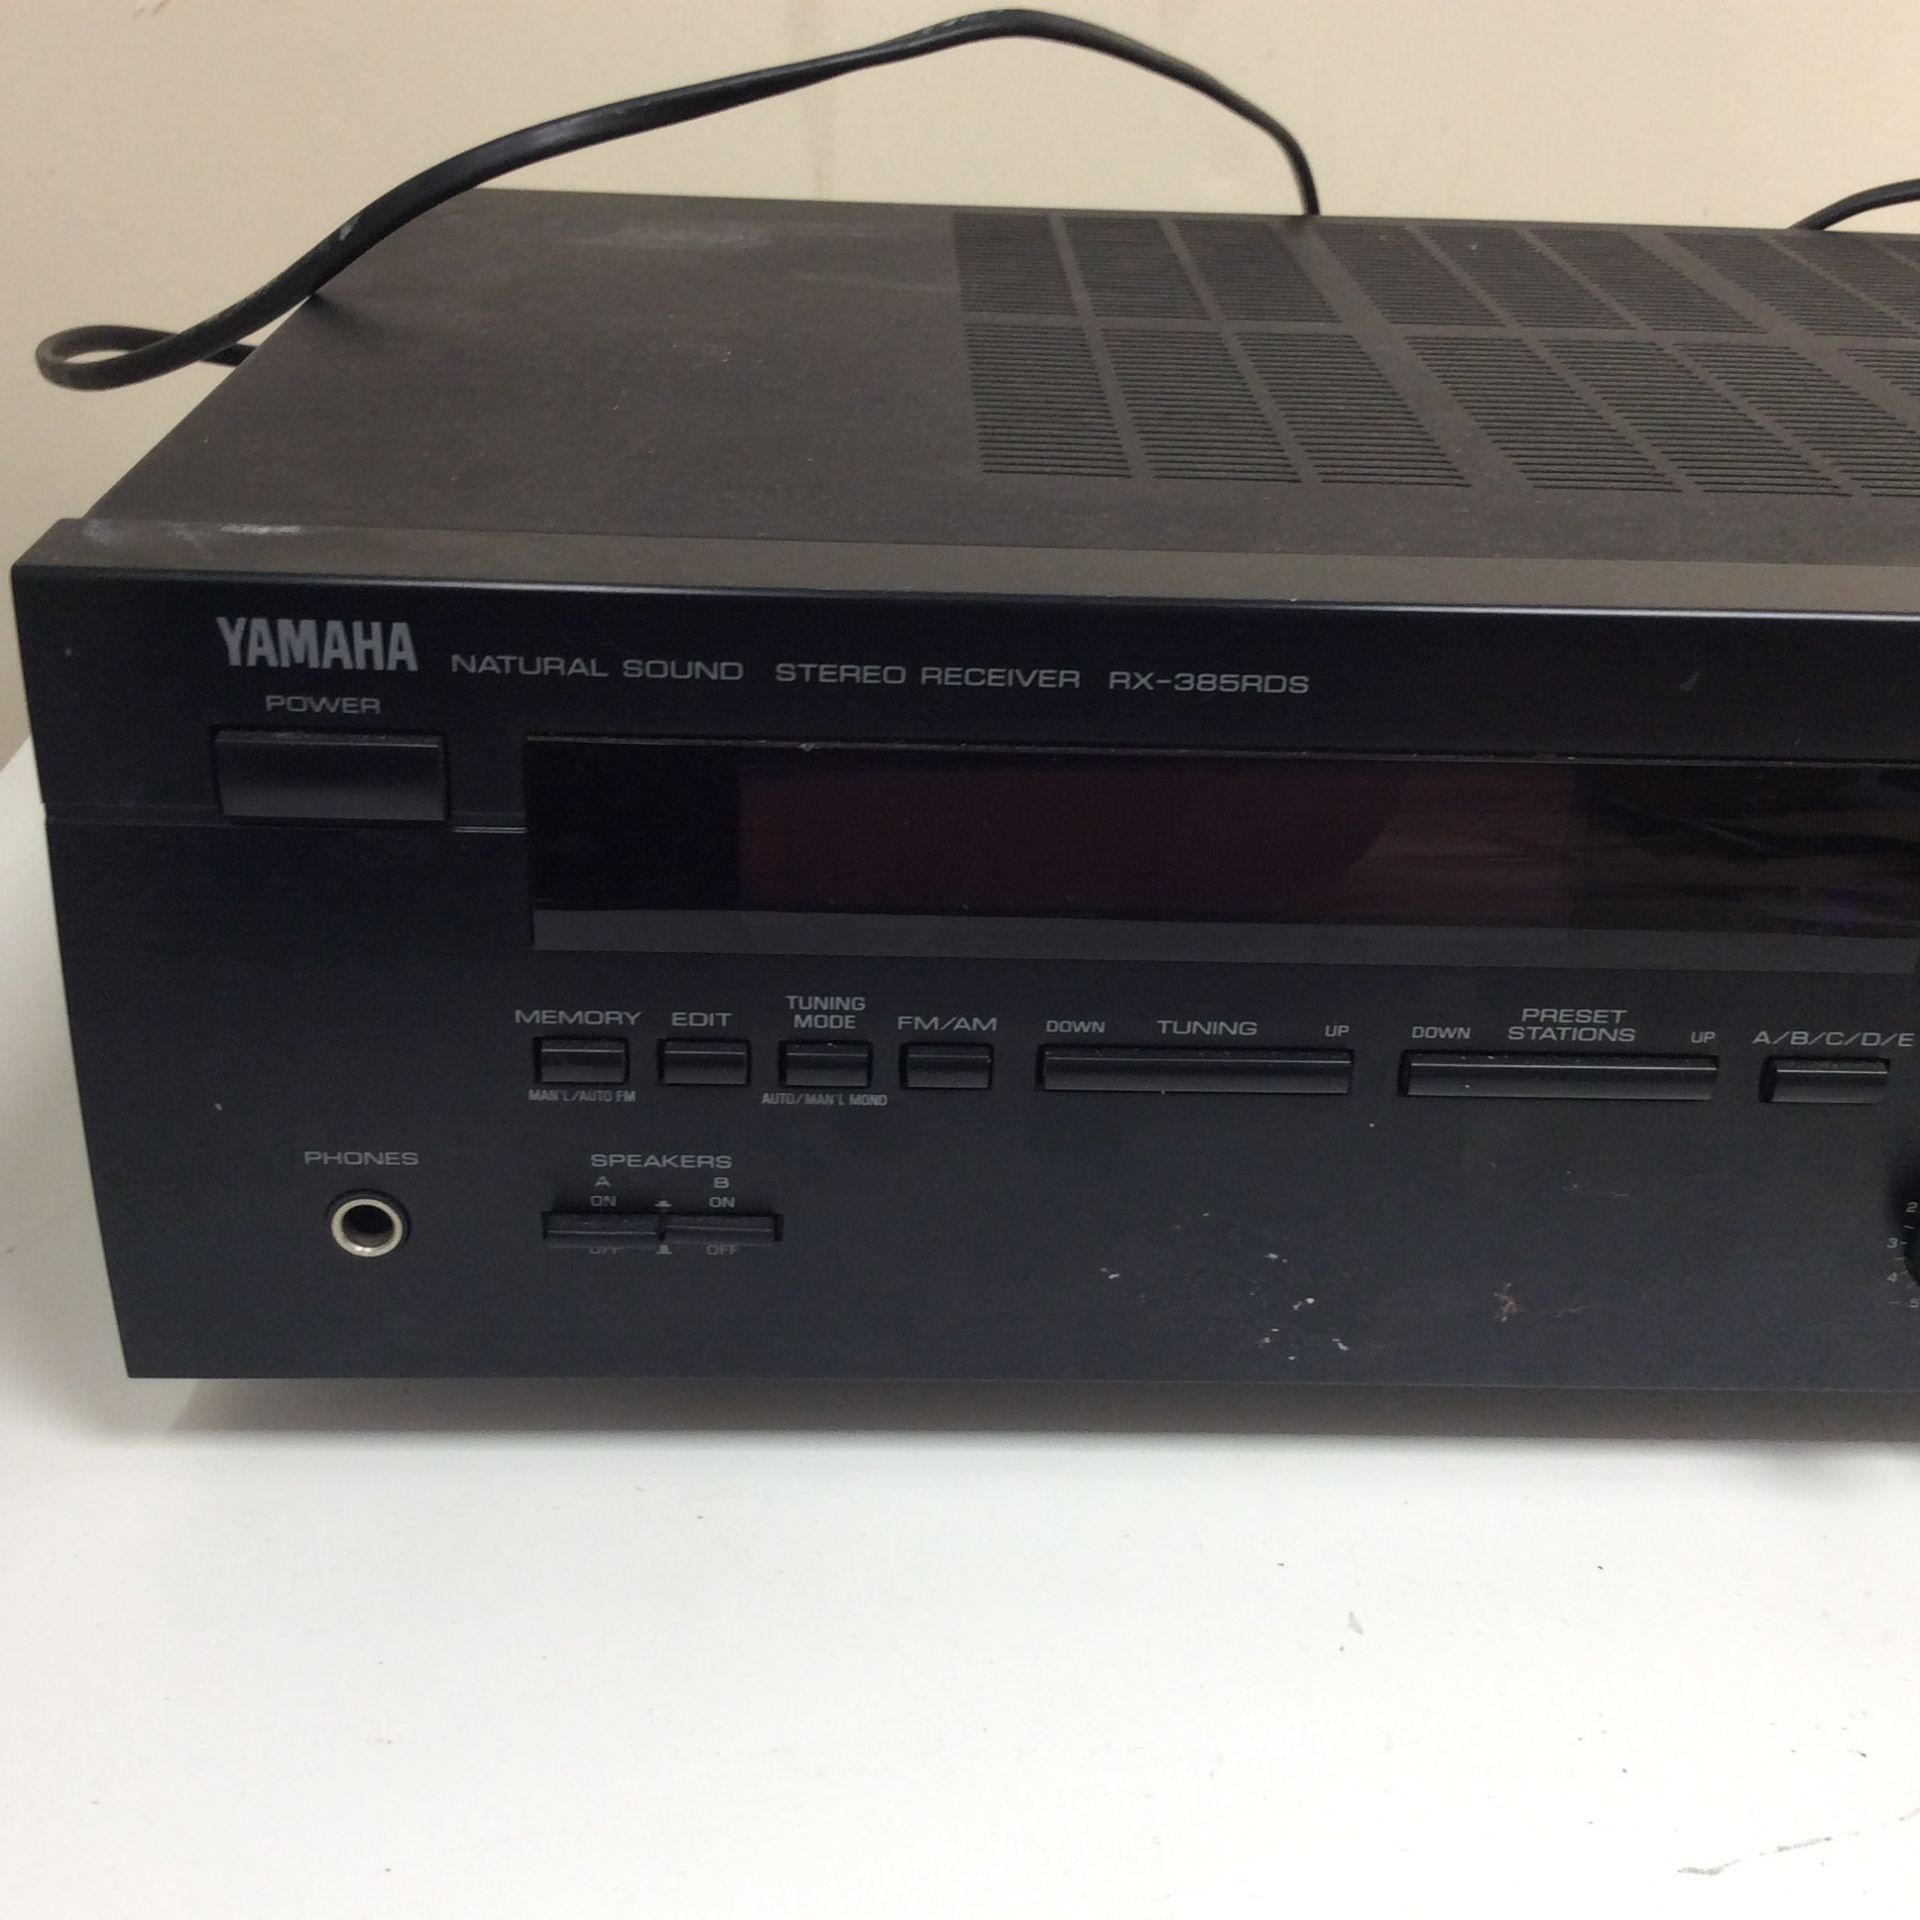 Yamaha natural sound stereo reciver - model rx-385rds - Image 2 of 4